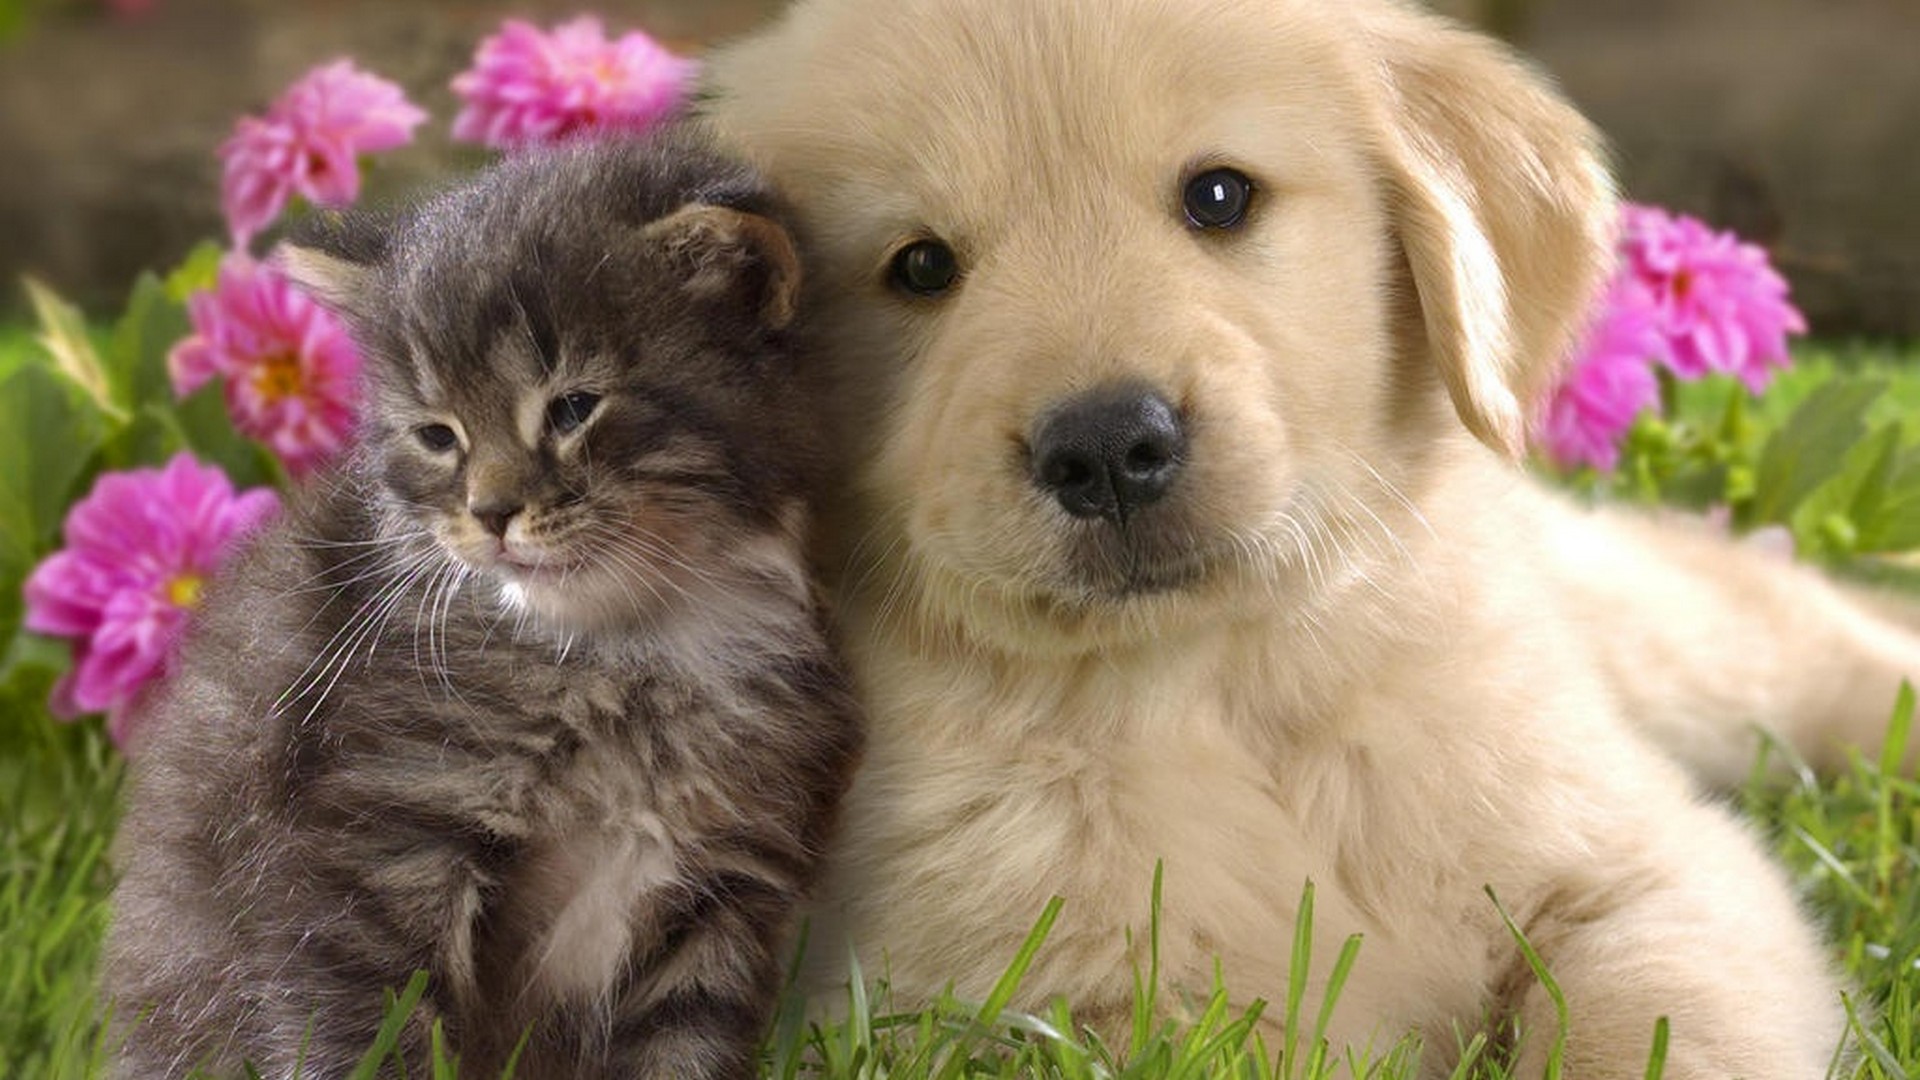 Cute Puppies Pictures Wallpaper HD With Resolution 1920X1080